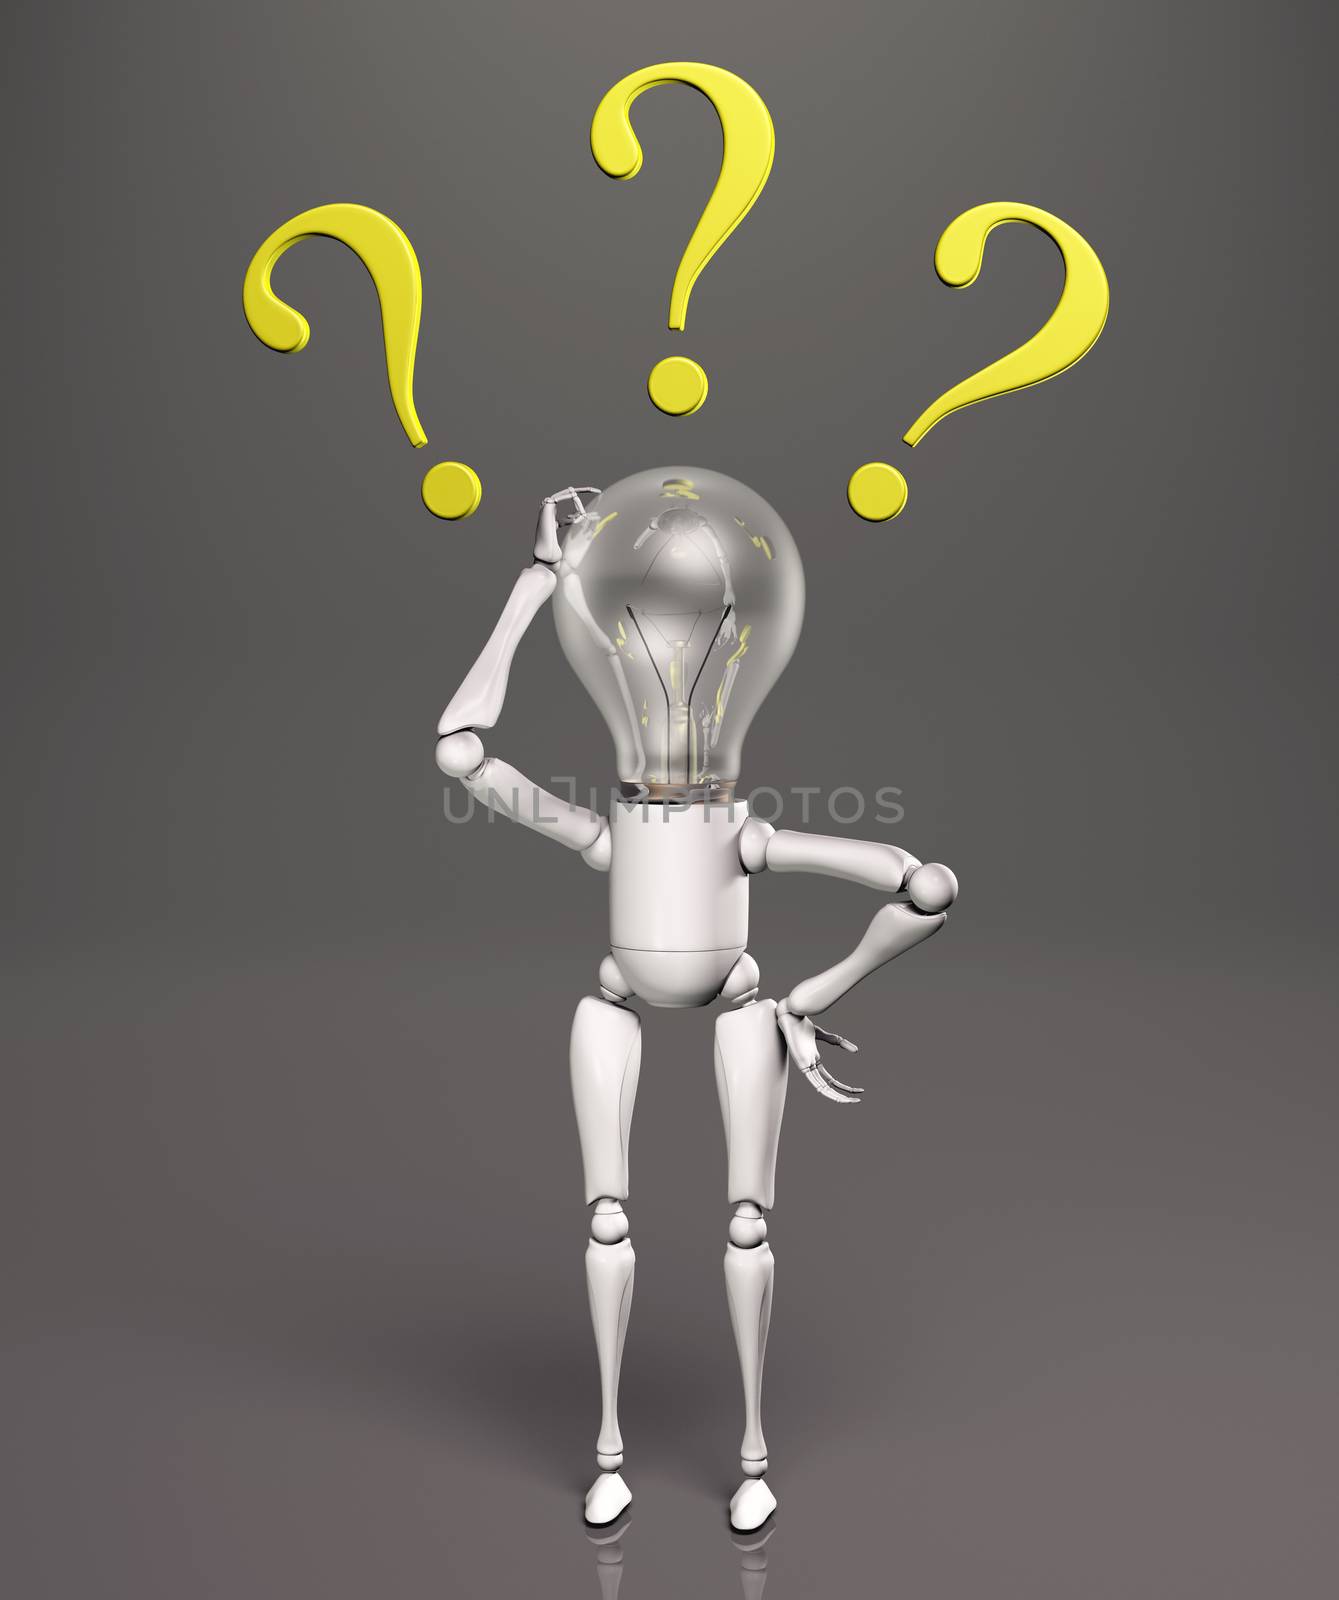 a standing lamp character scratches his bulb light switched off with his right hand and has three yellow questions marks around his head, on a dark background